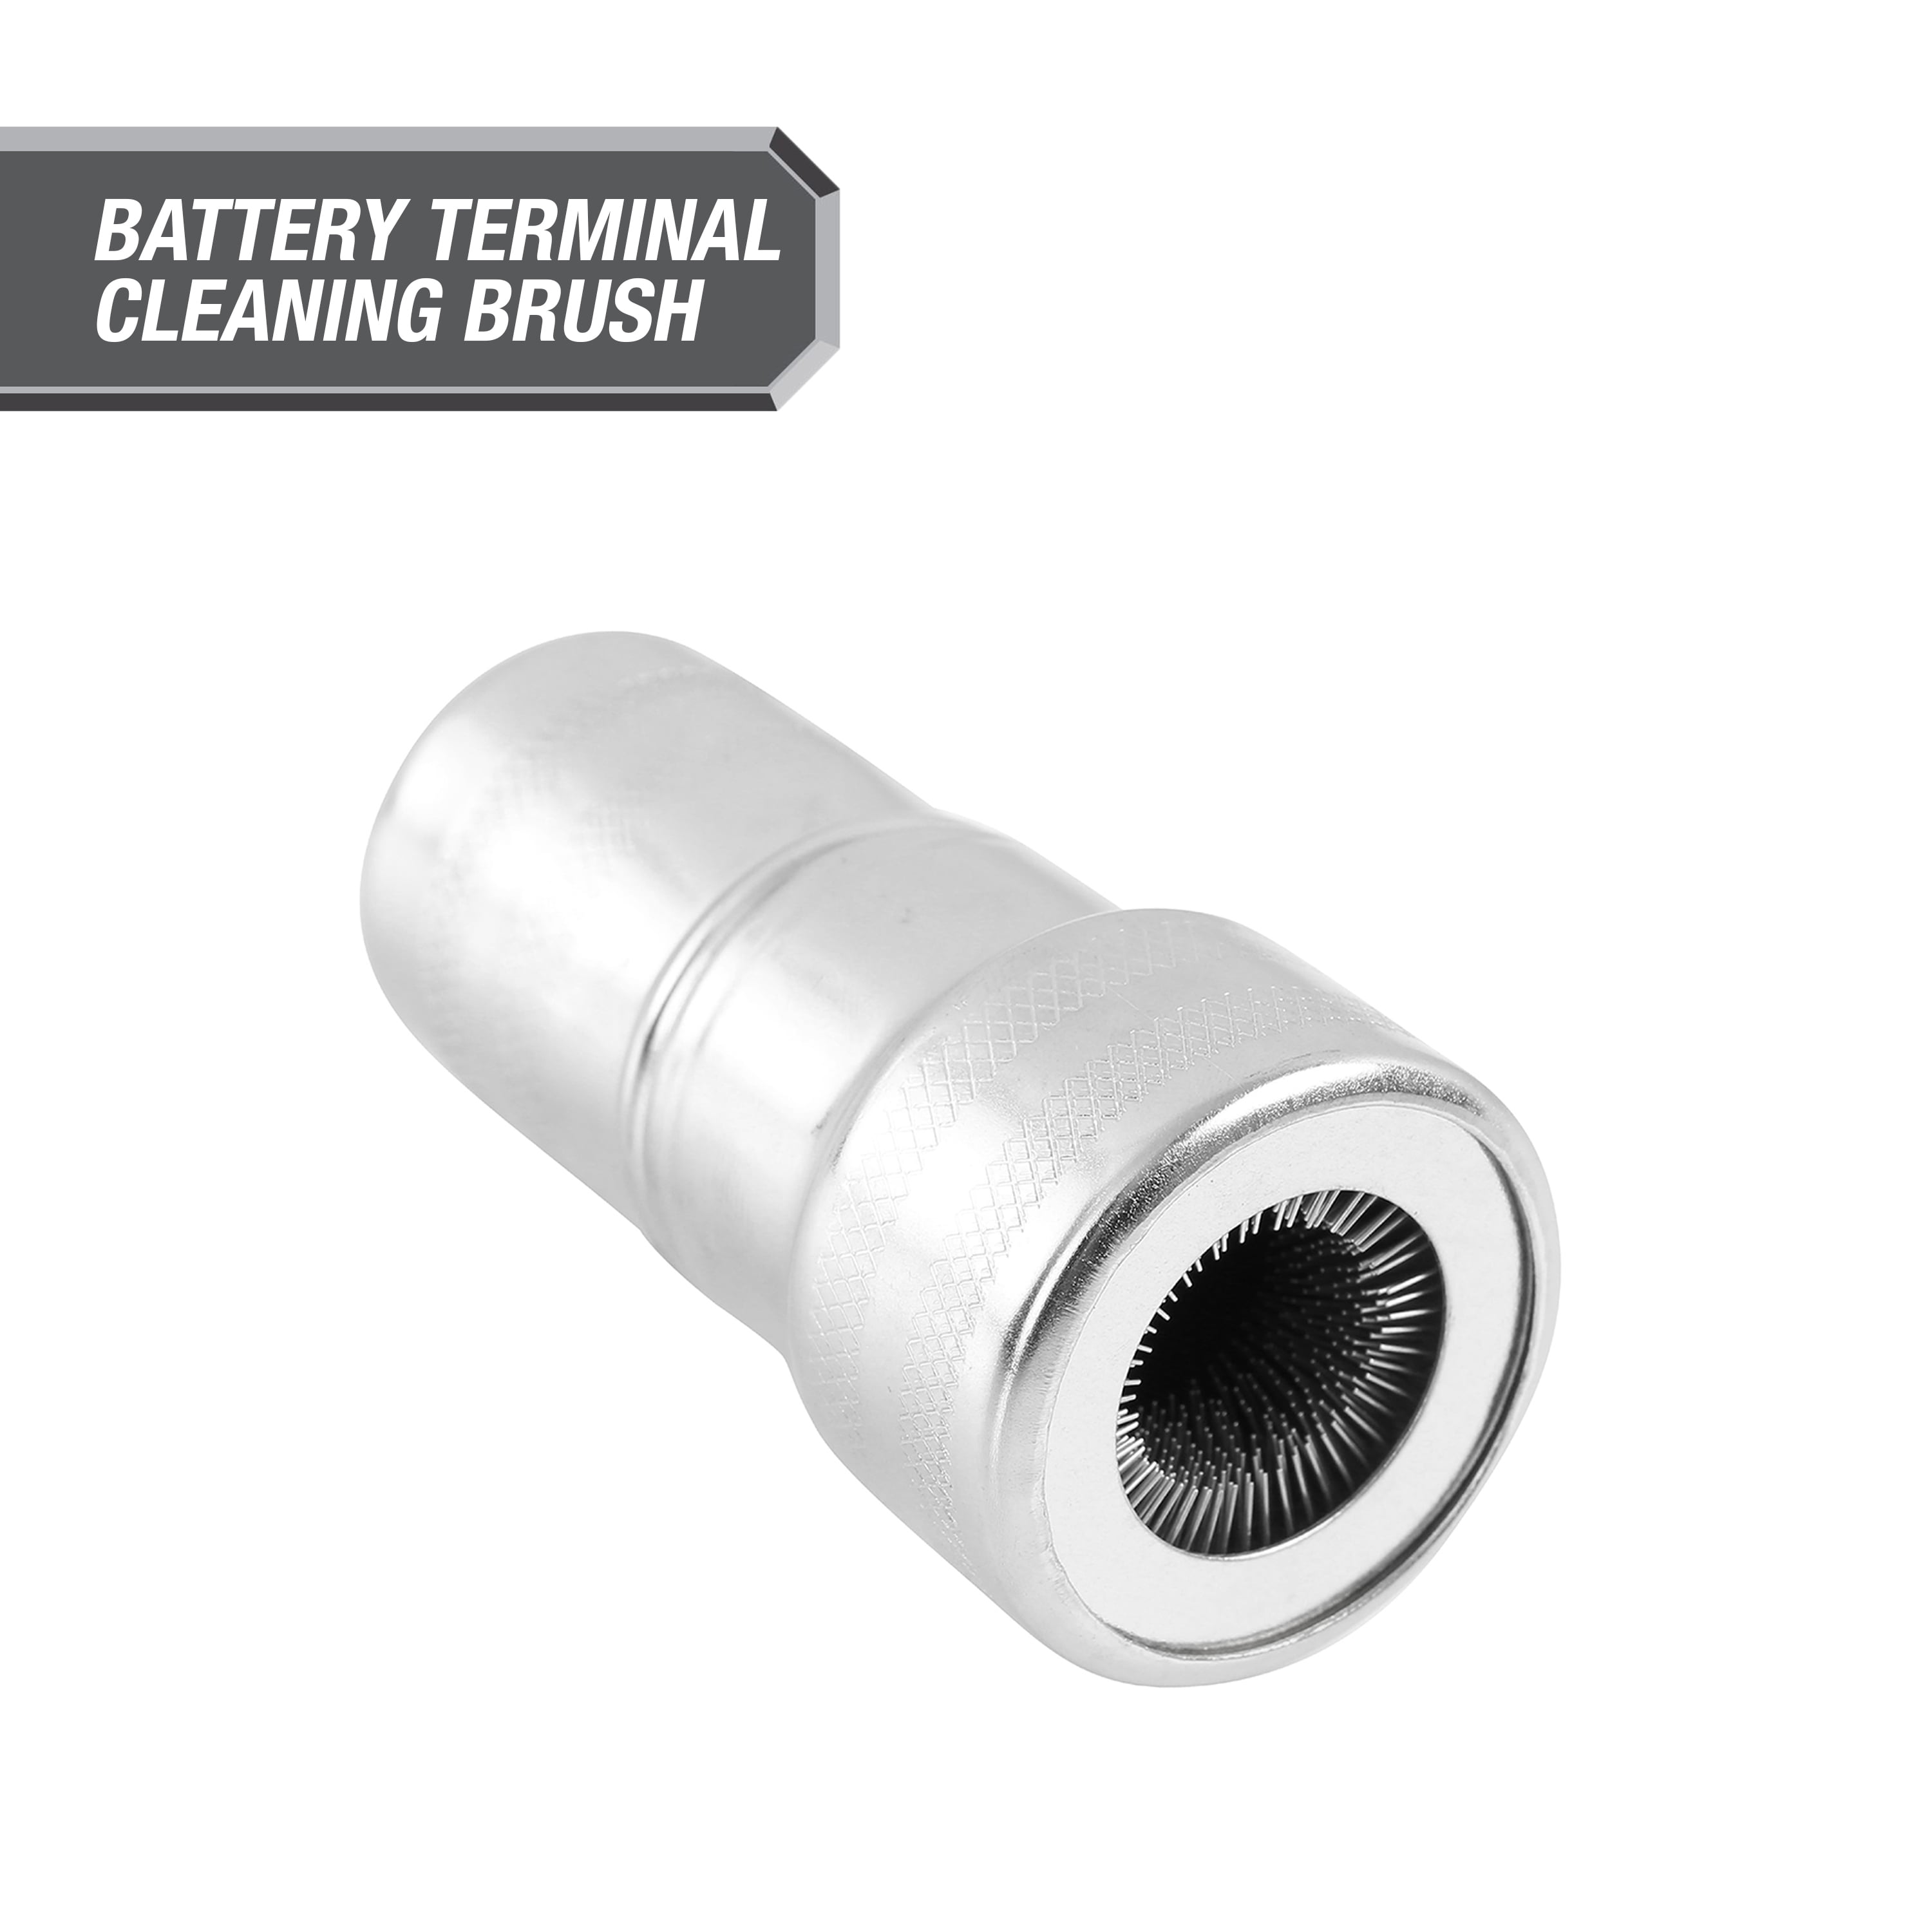 Hyper Tough Battery Terminal and Post Cleaning Brush